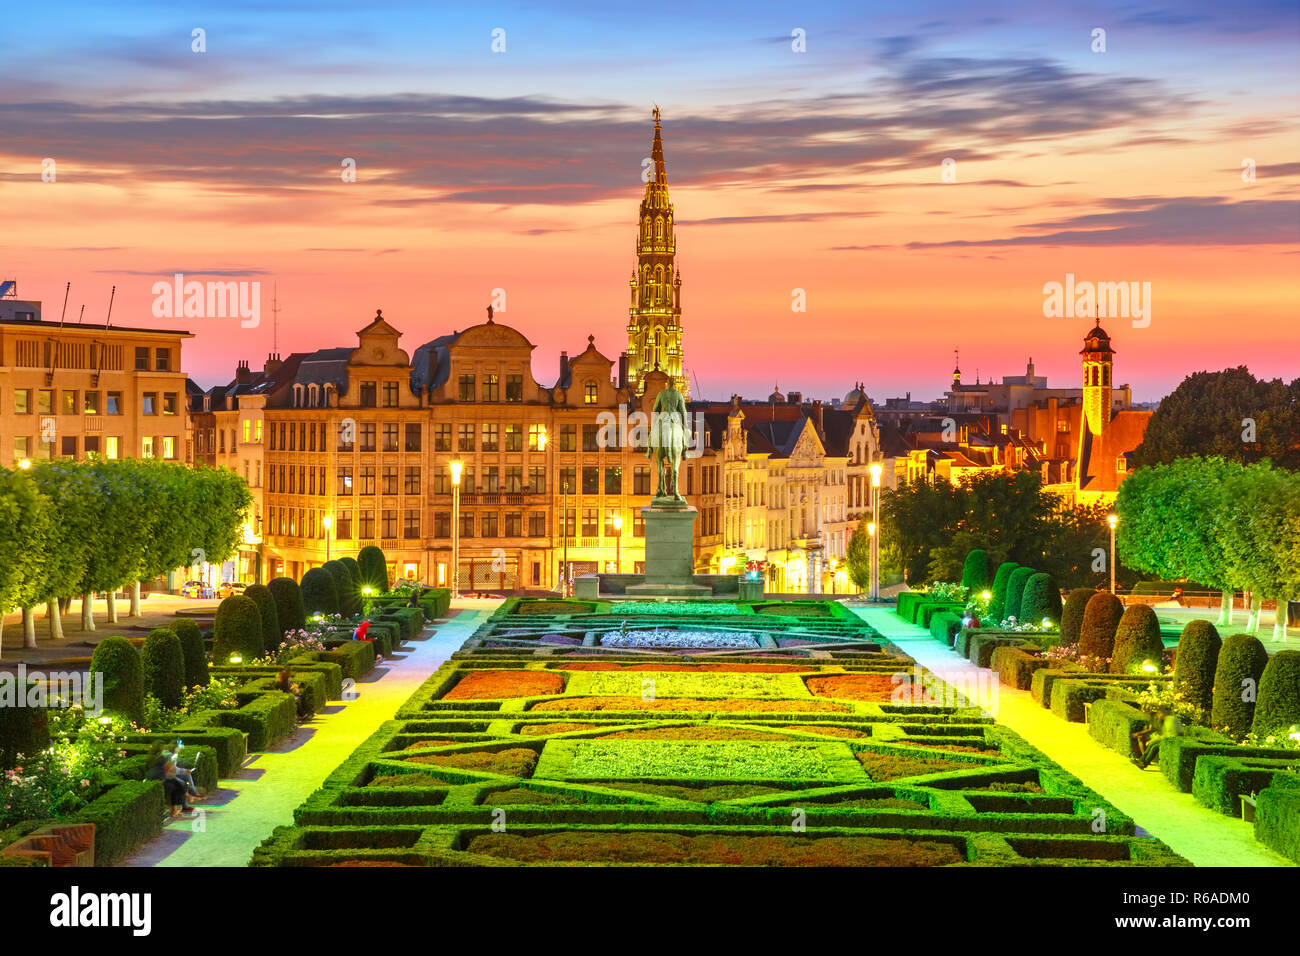 Brussels at sunset, Brussels, Belgium Stock Photo